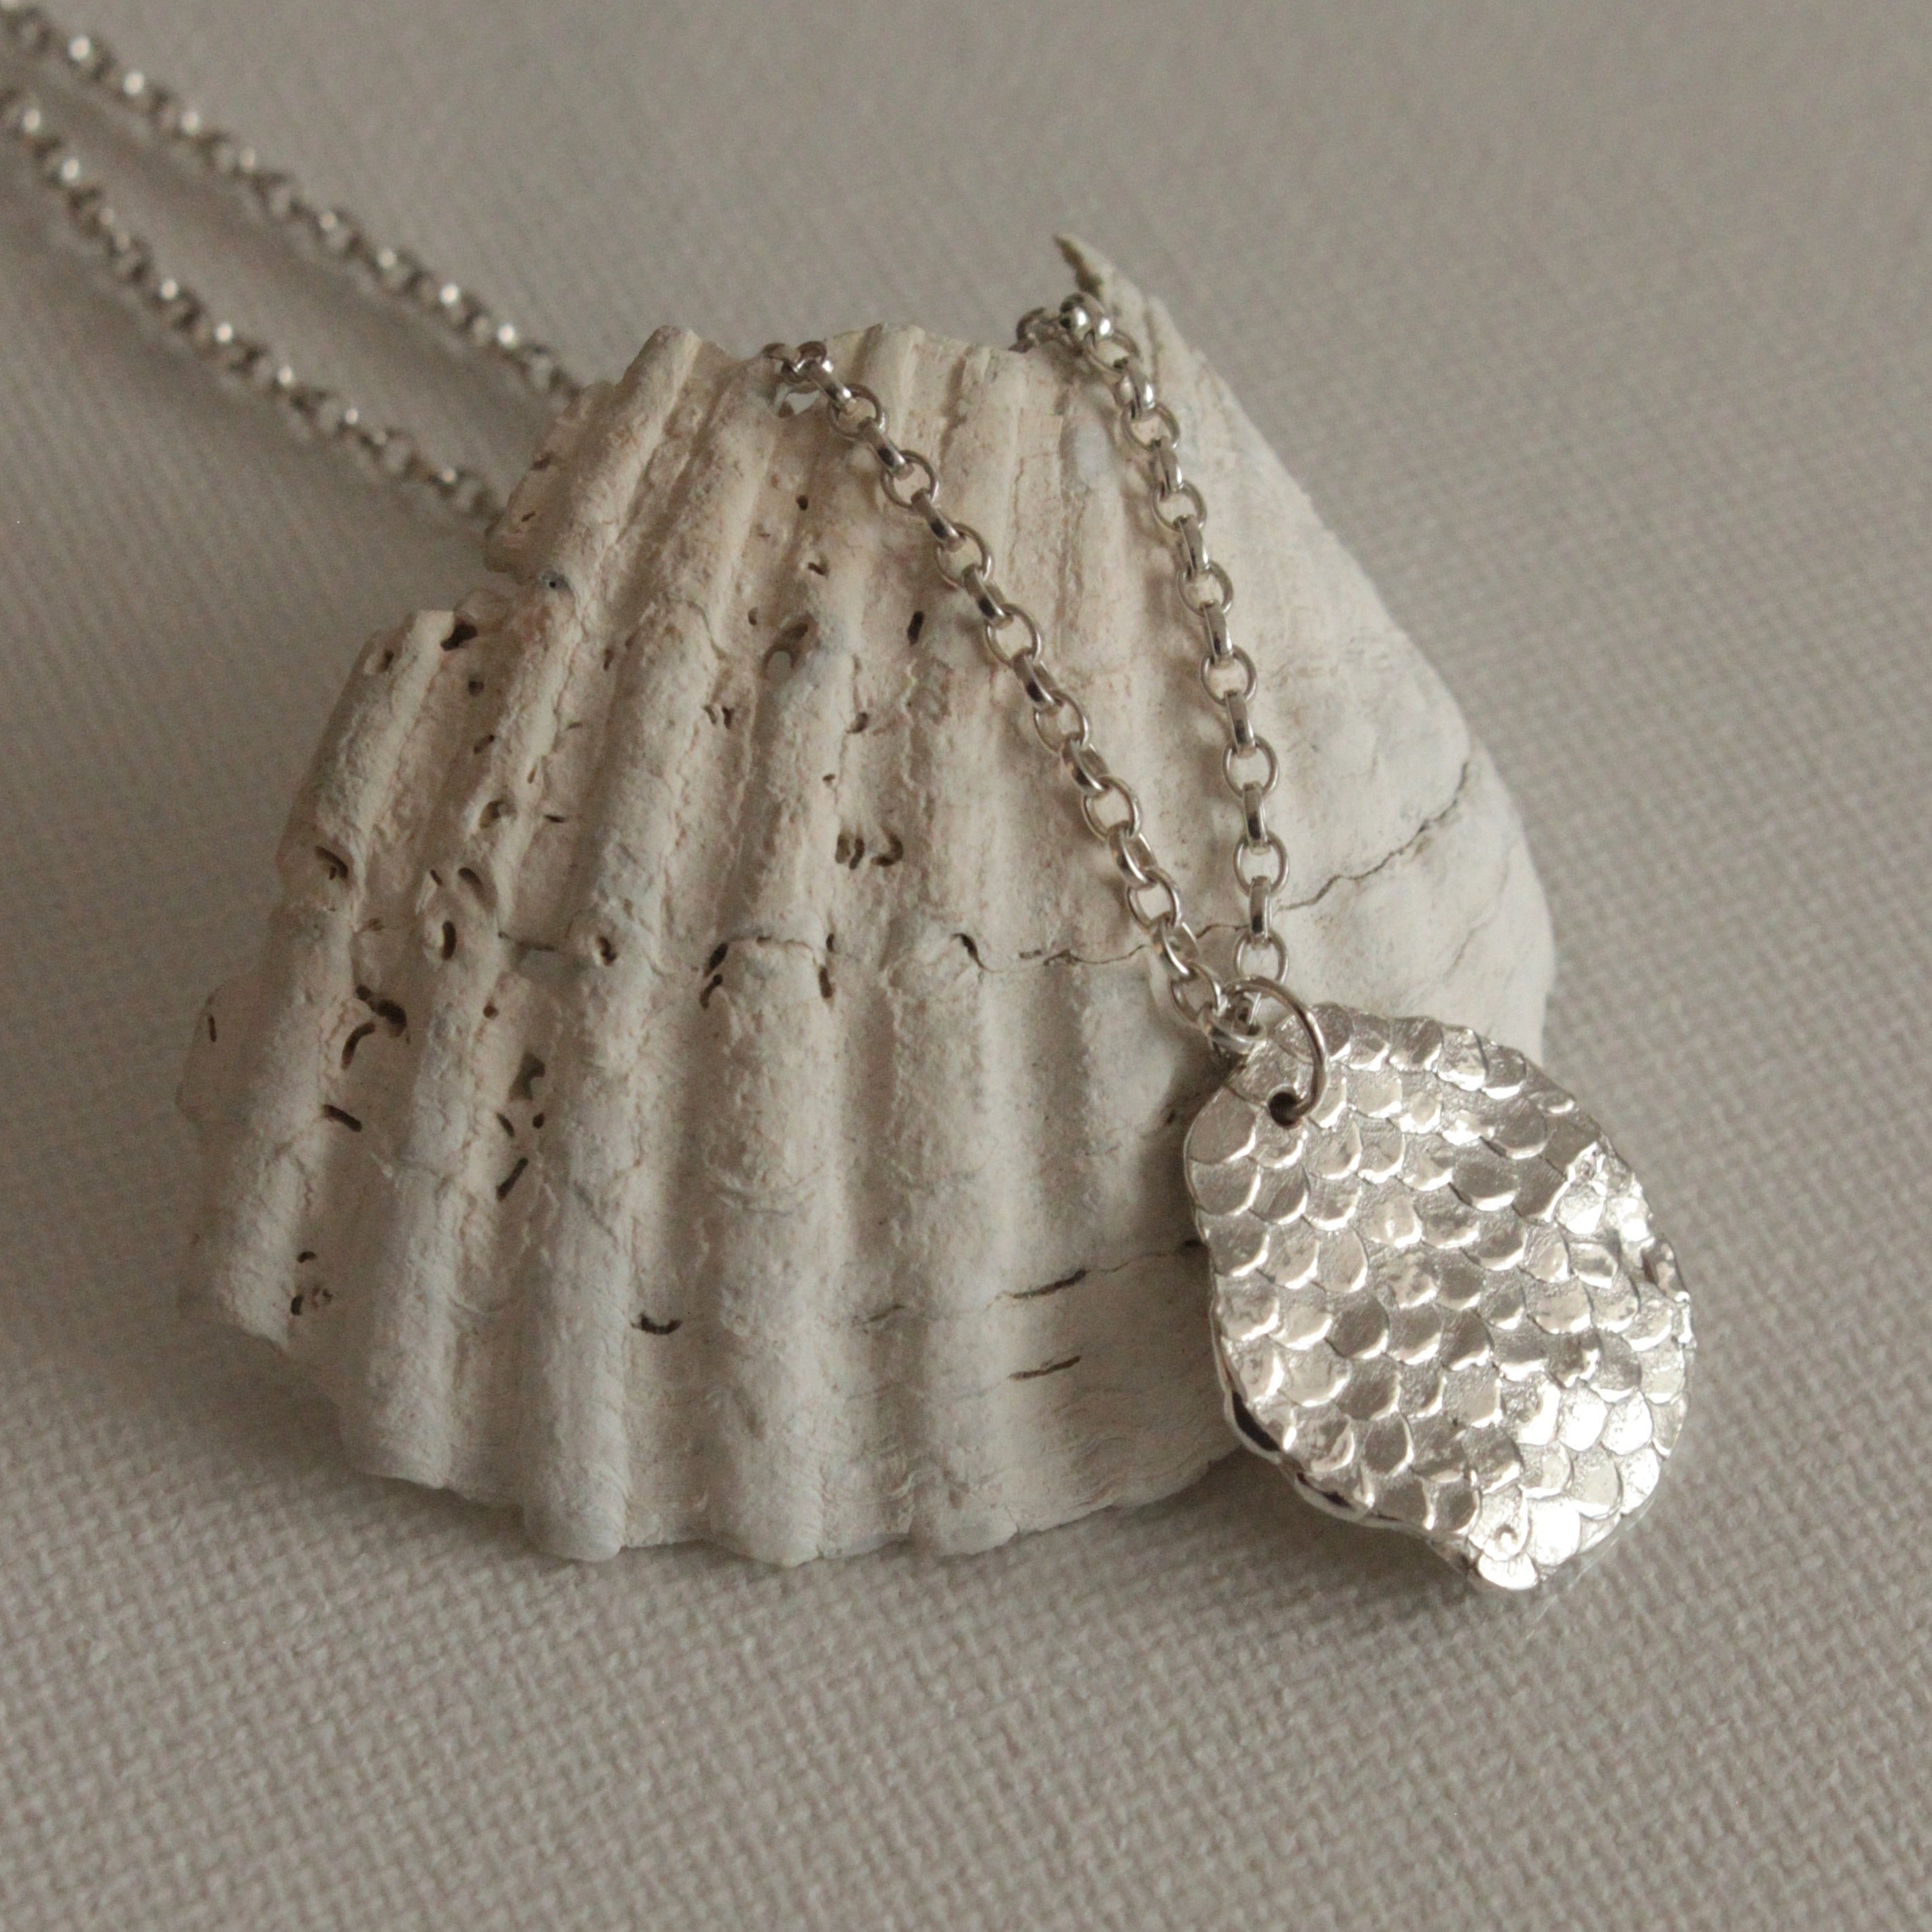 The Inner Guidance pendant is full of organic, oceanic textures and features the signature Siren details on the front. Hold the pendant in your fingers through times of stress to bring you a sense of ease and grounding. Enjoy the weight of the pendant and layer with other necklaces to create your very own style.